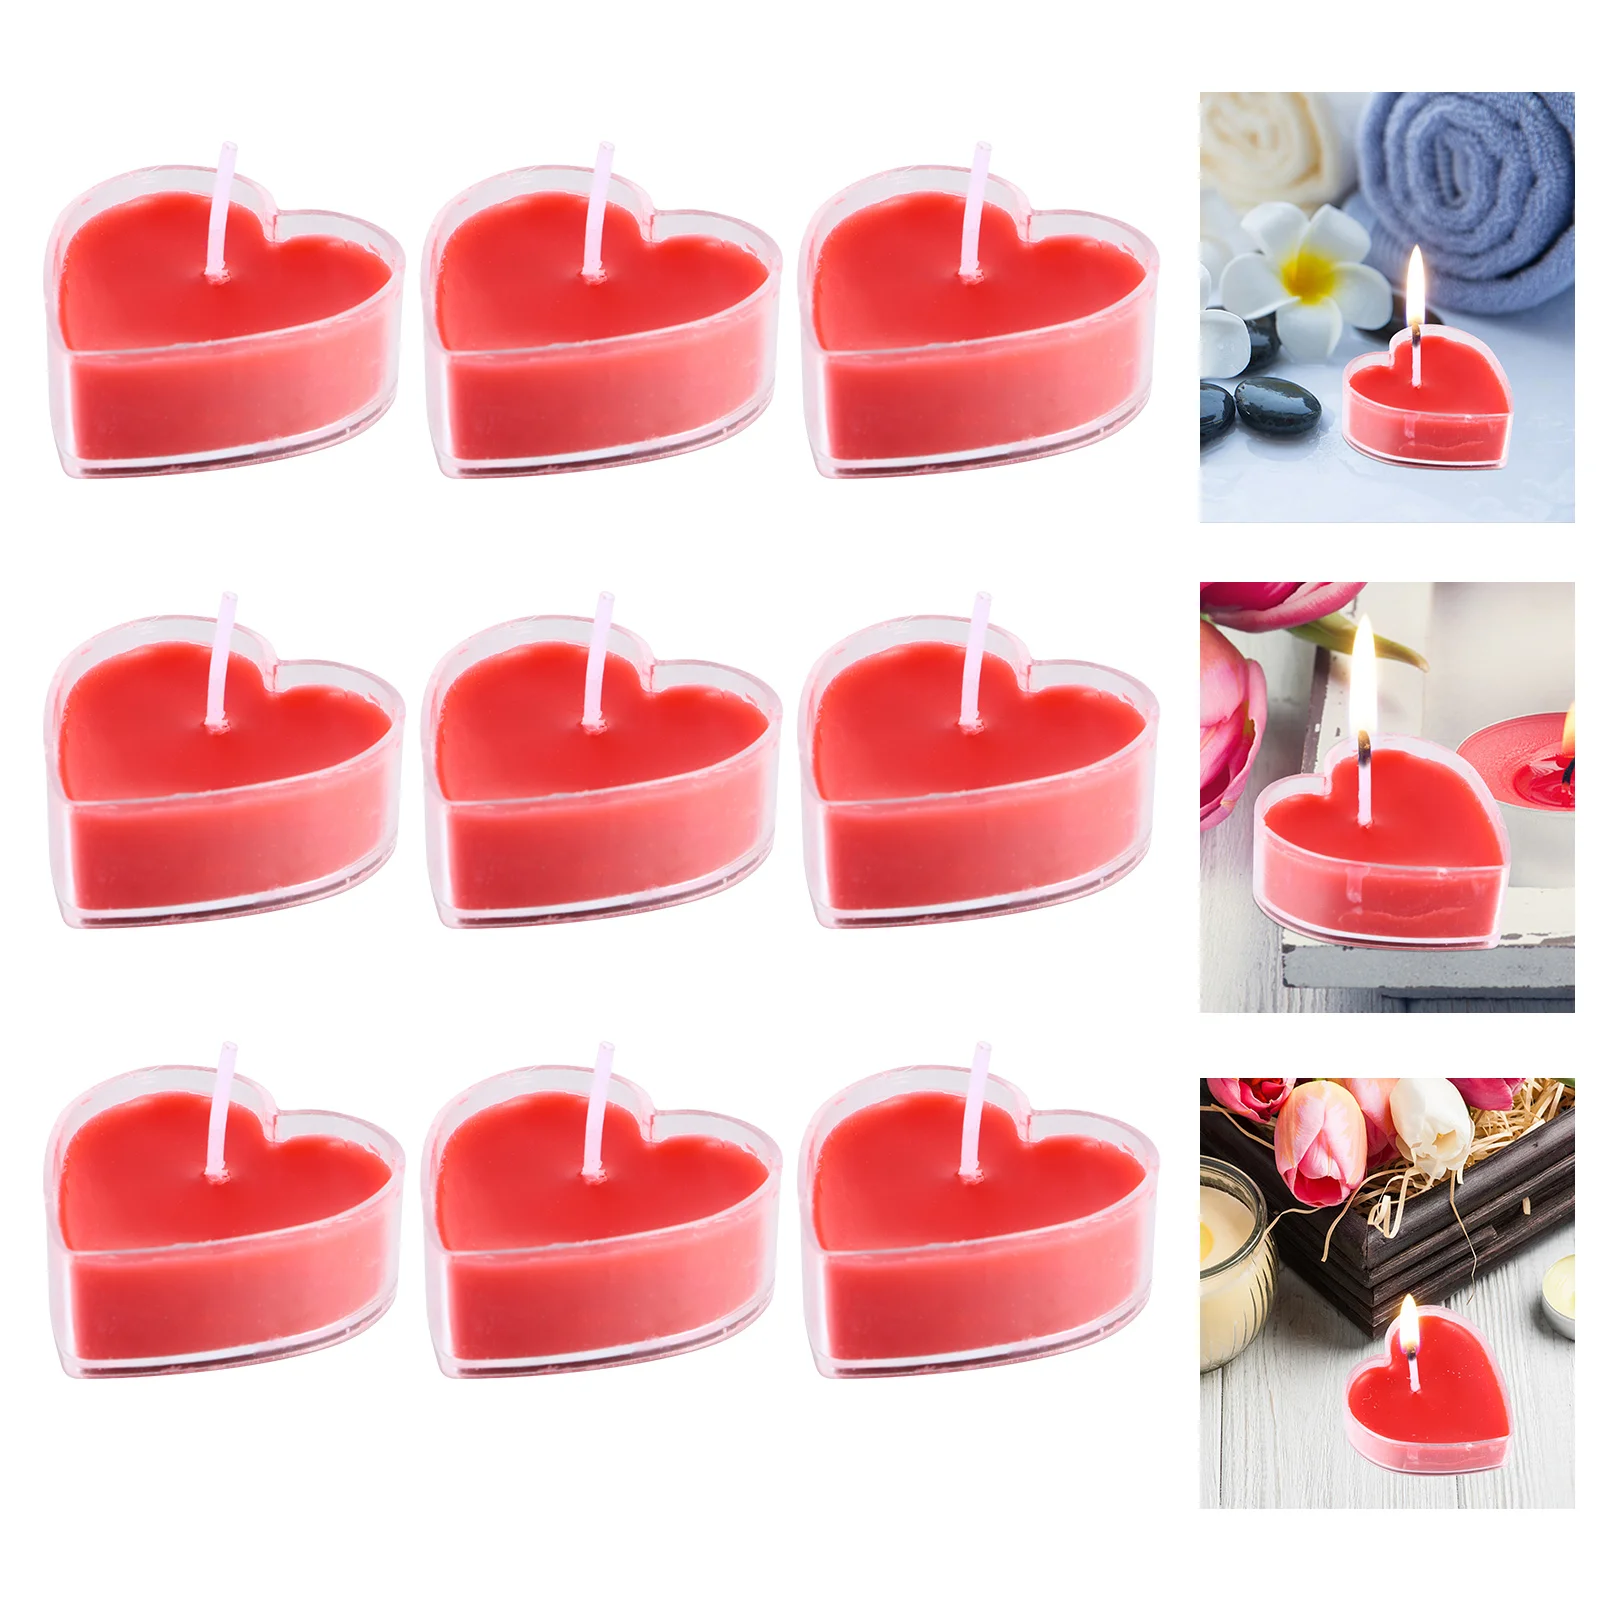 

Heartromantic Tealight Love Proposal Wedding Red Scented Decorative Marriage Lights Tea Smokeless Shaped Favors Style